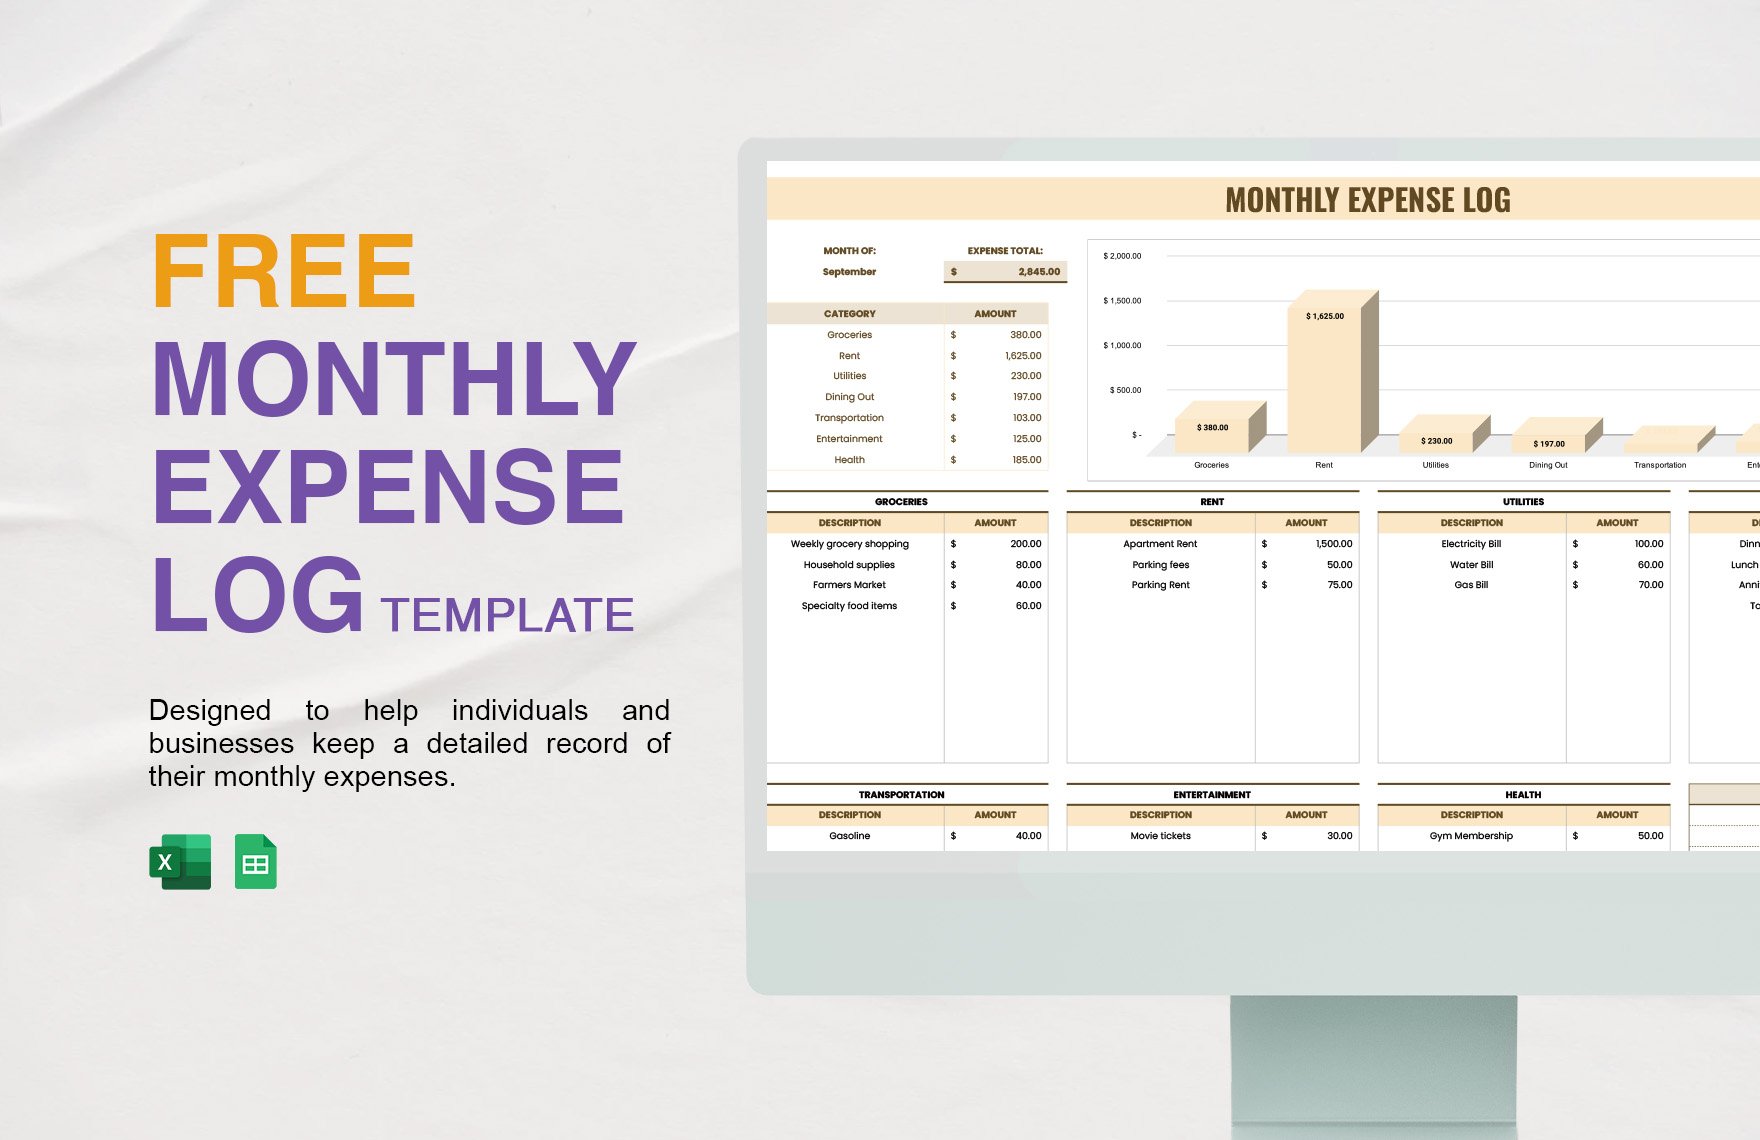 Free Monthly Expense Log Template in Excel, Google Sheets